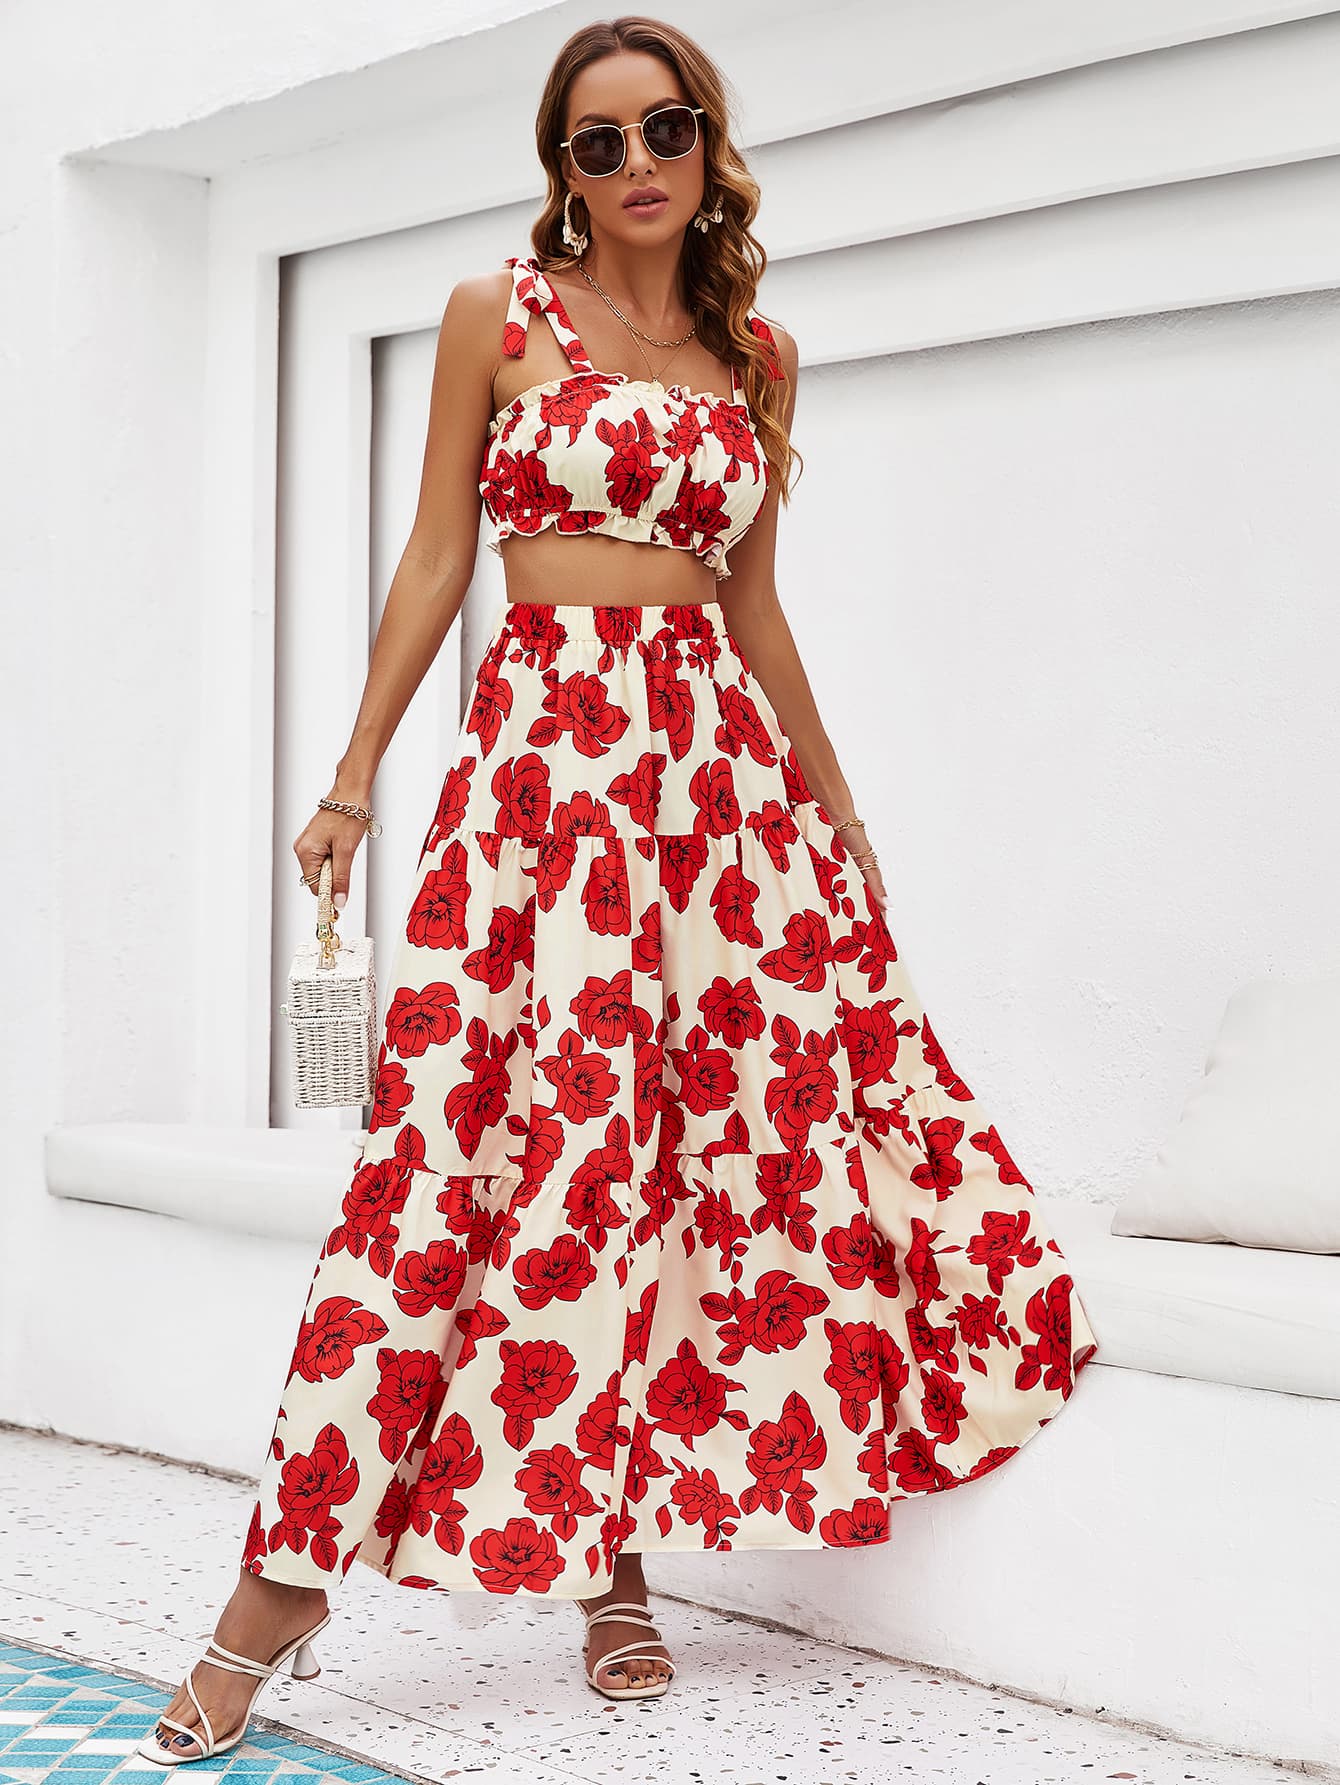 Floral Tie Shoulder Top and Tiered Maxi Skirt Set - Online Only